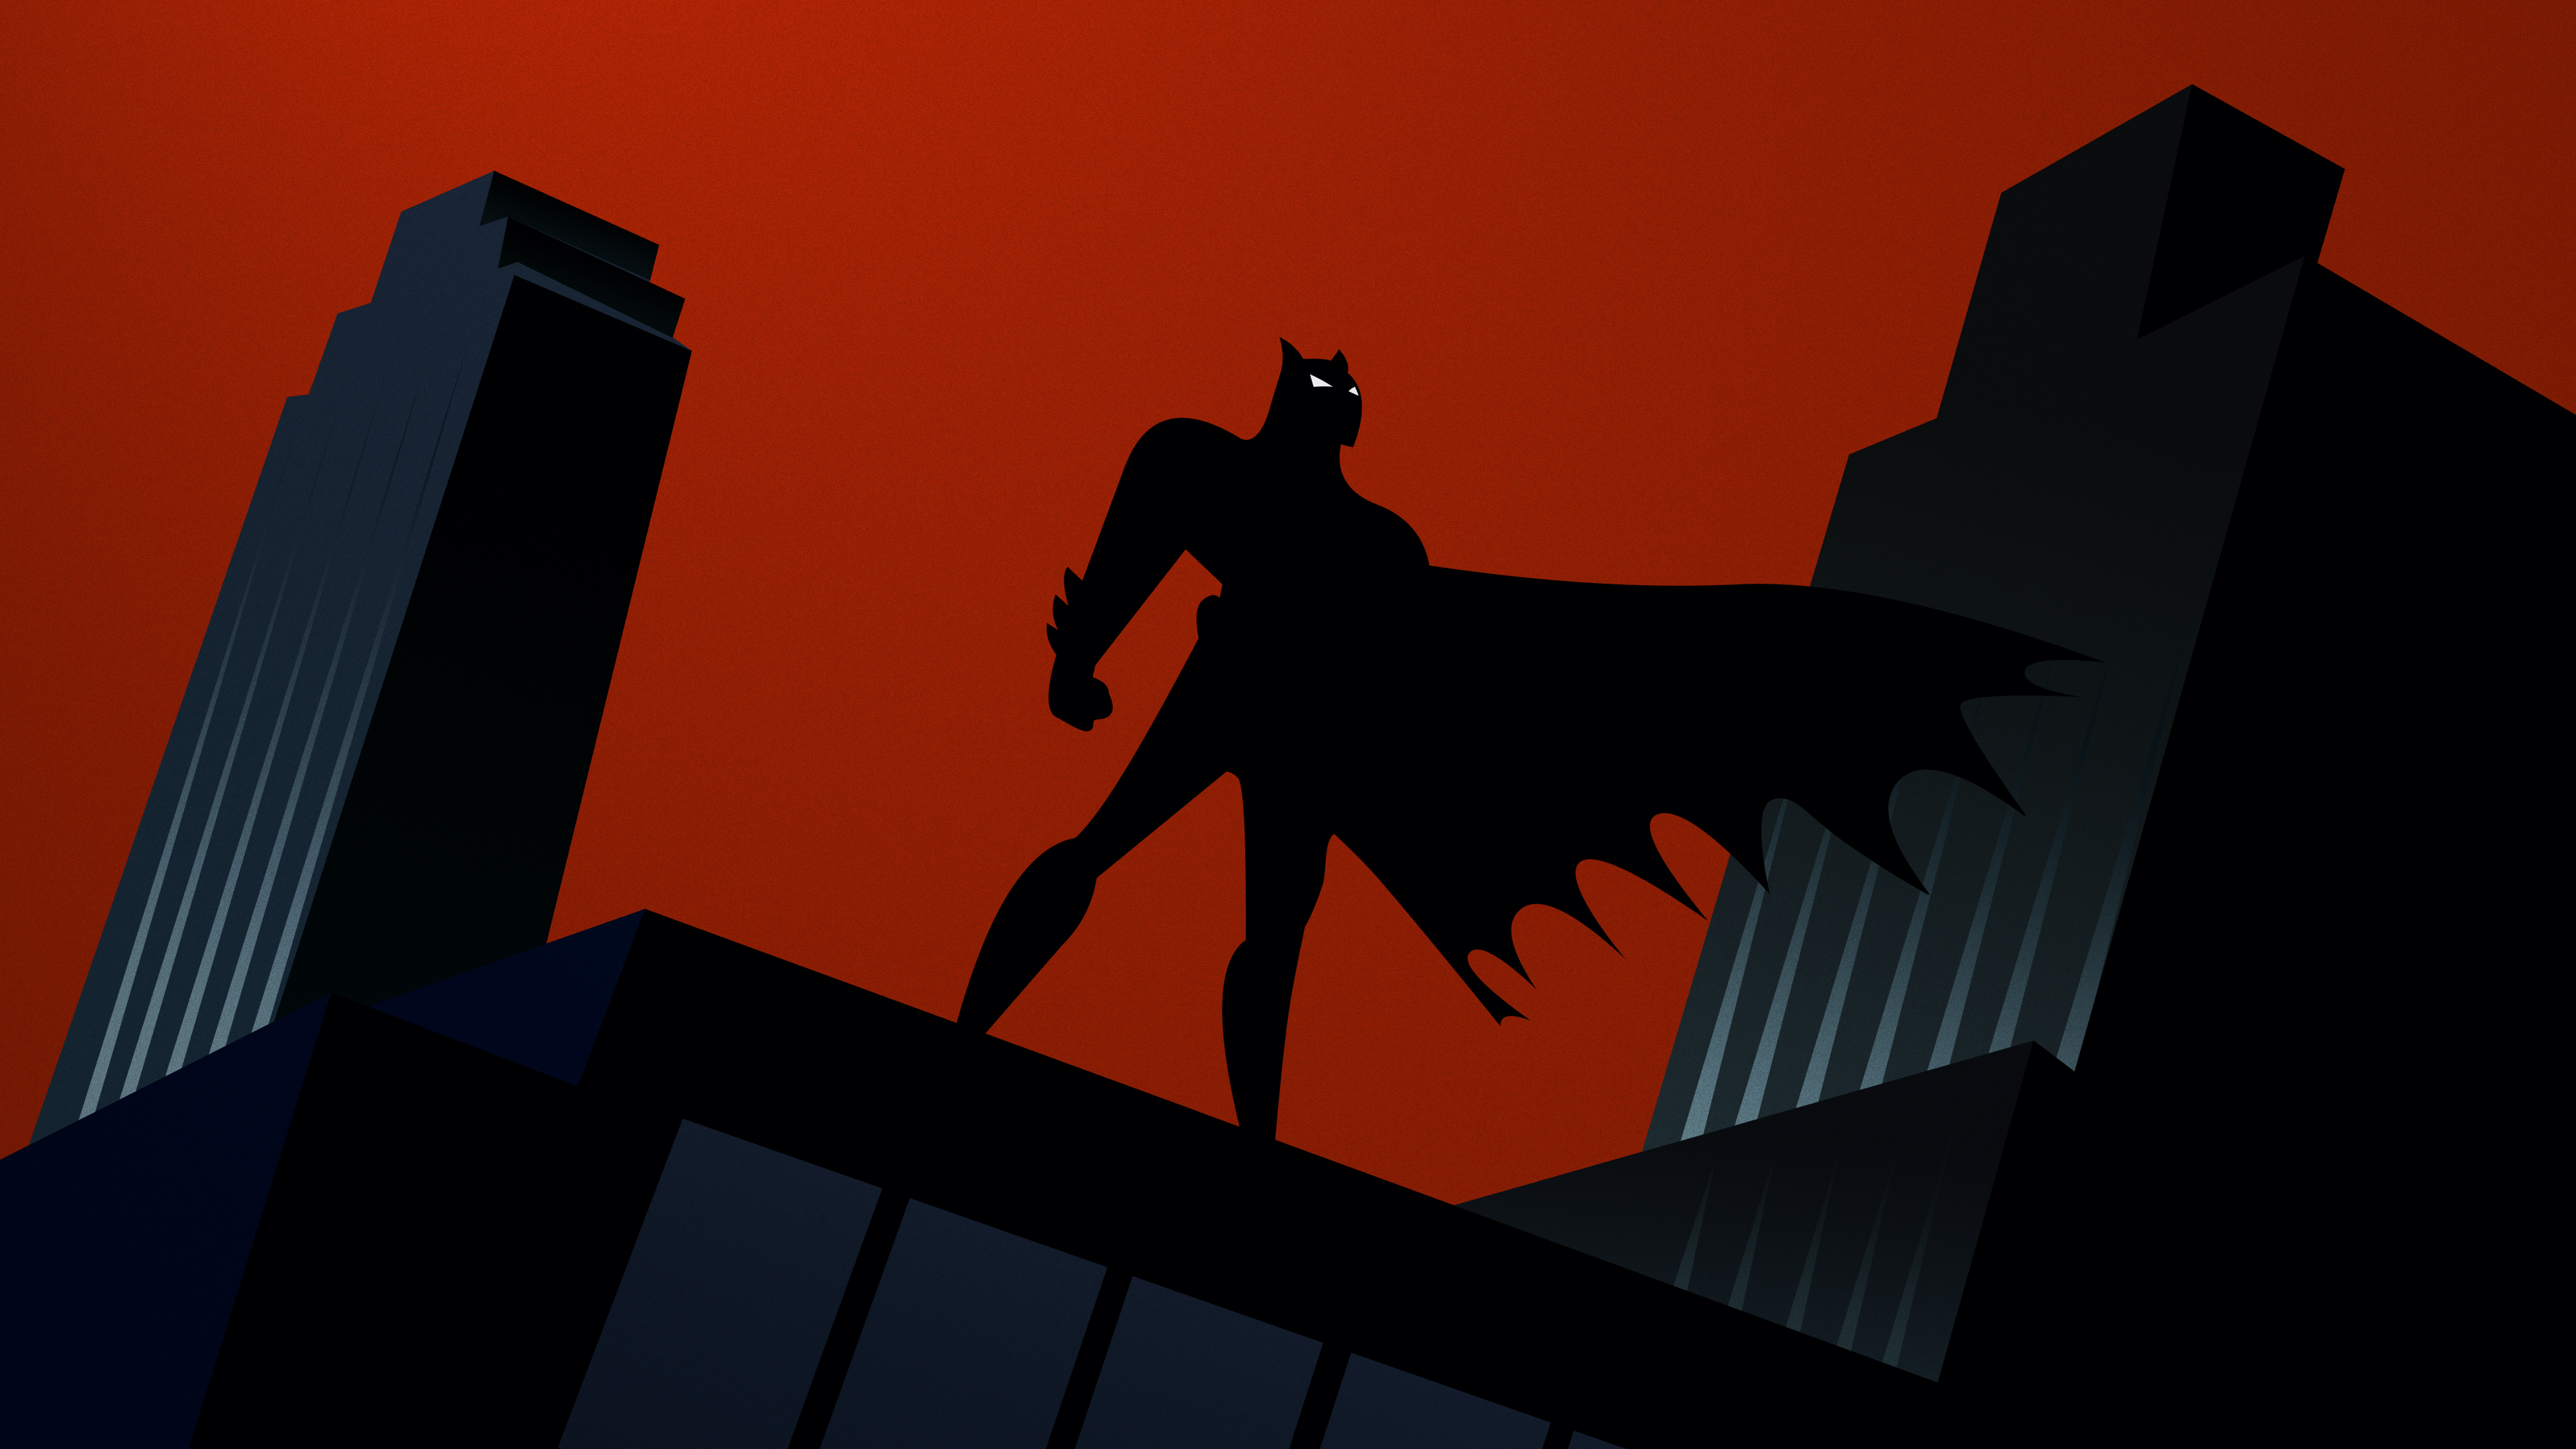 70+ Batman Logo HD Wallpapers and Backgrounds